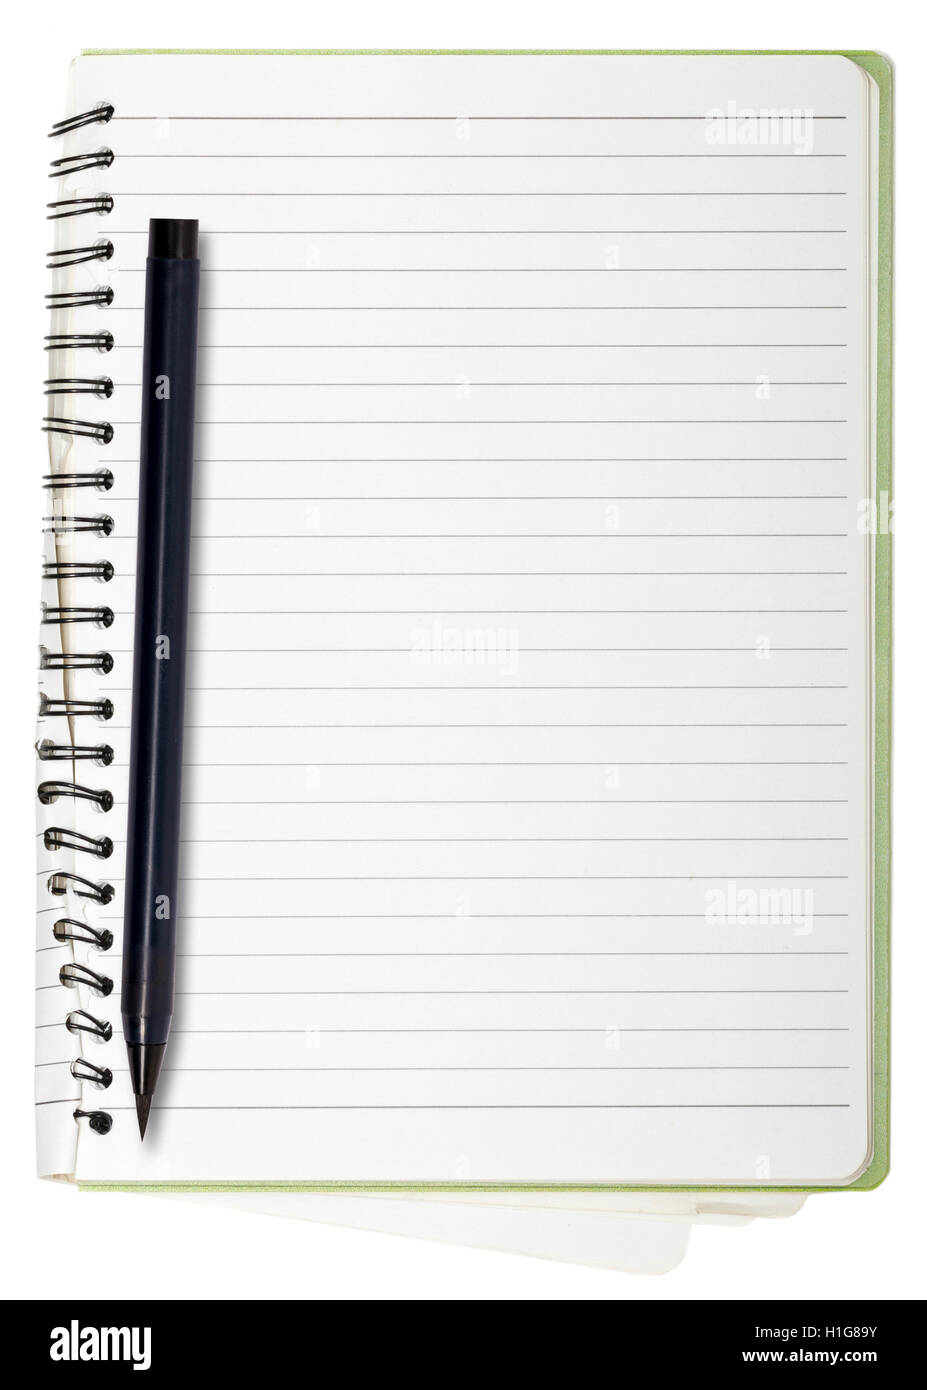 used blank note book with ring binder and japanese brush pen, is Stock Photo